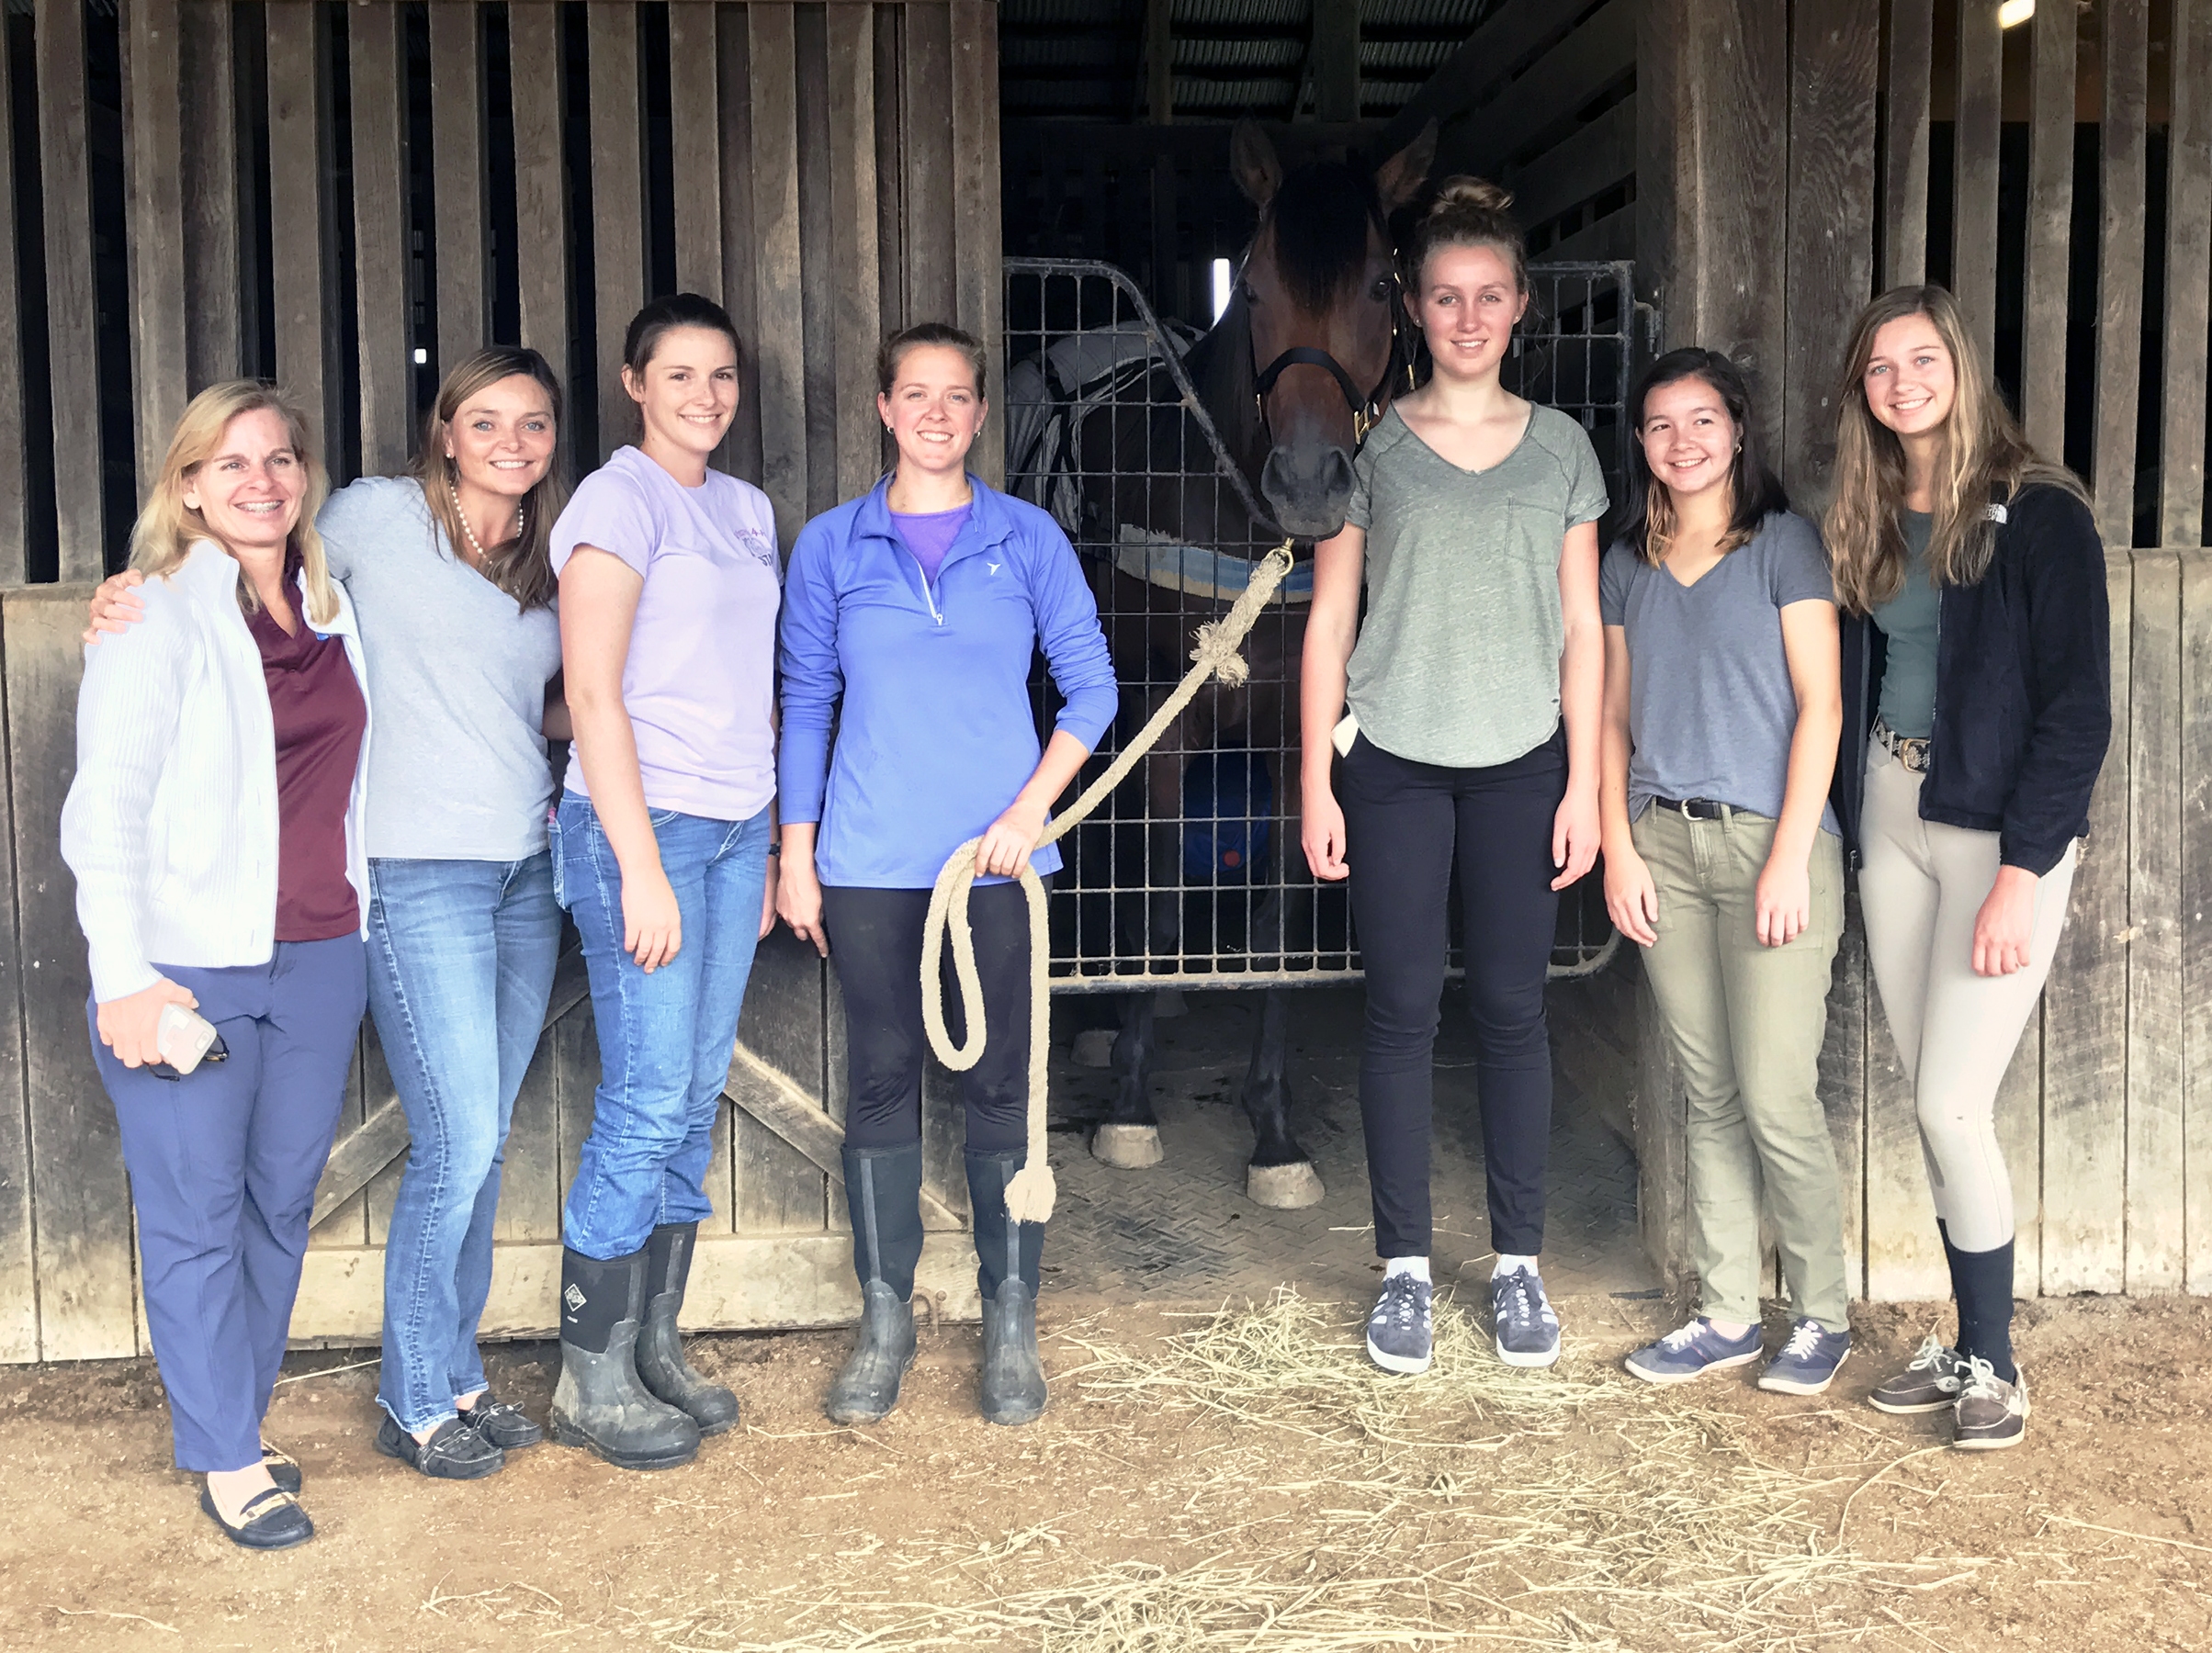 A new partnership between Foxcroft School and Virginia Tech’s Middleburg Agricultural Research and Extension (MARE) Center brings high school students together with graduate students to conduct resear